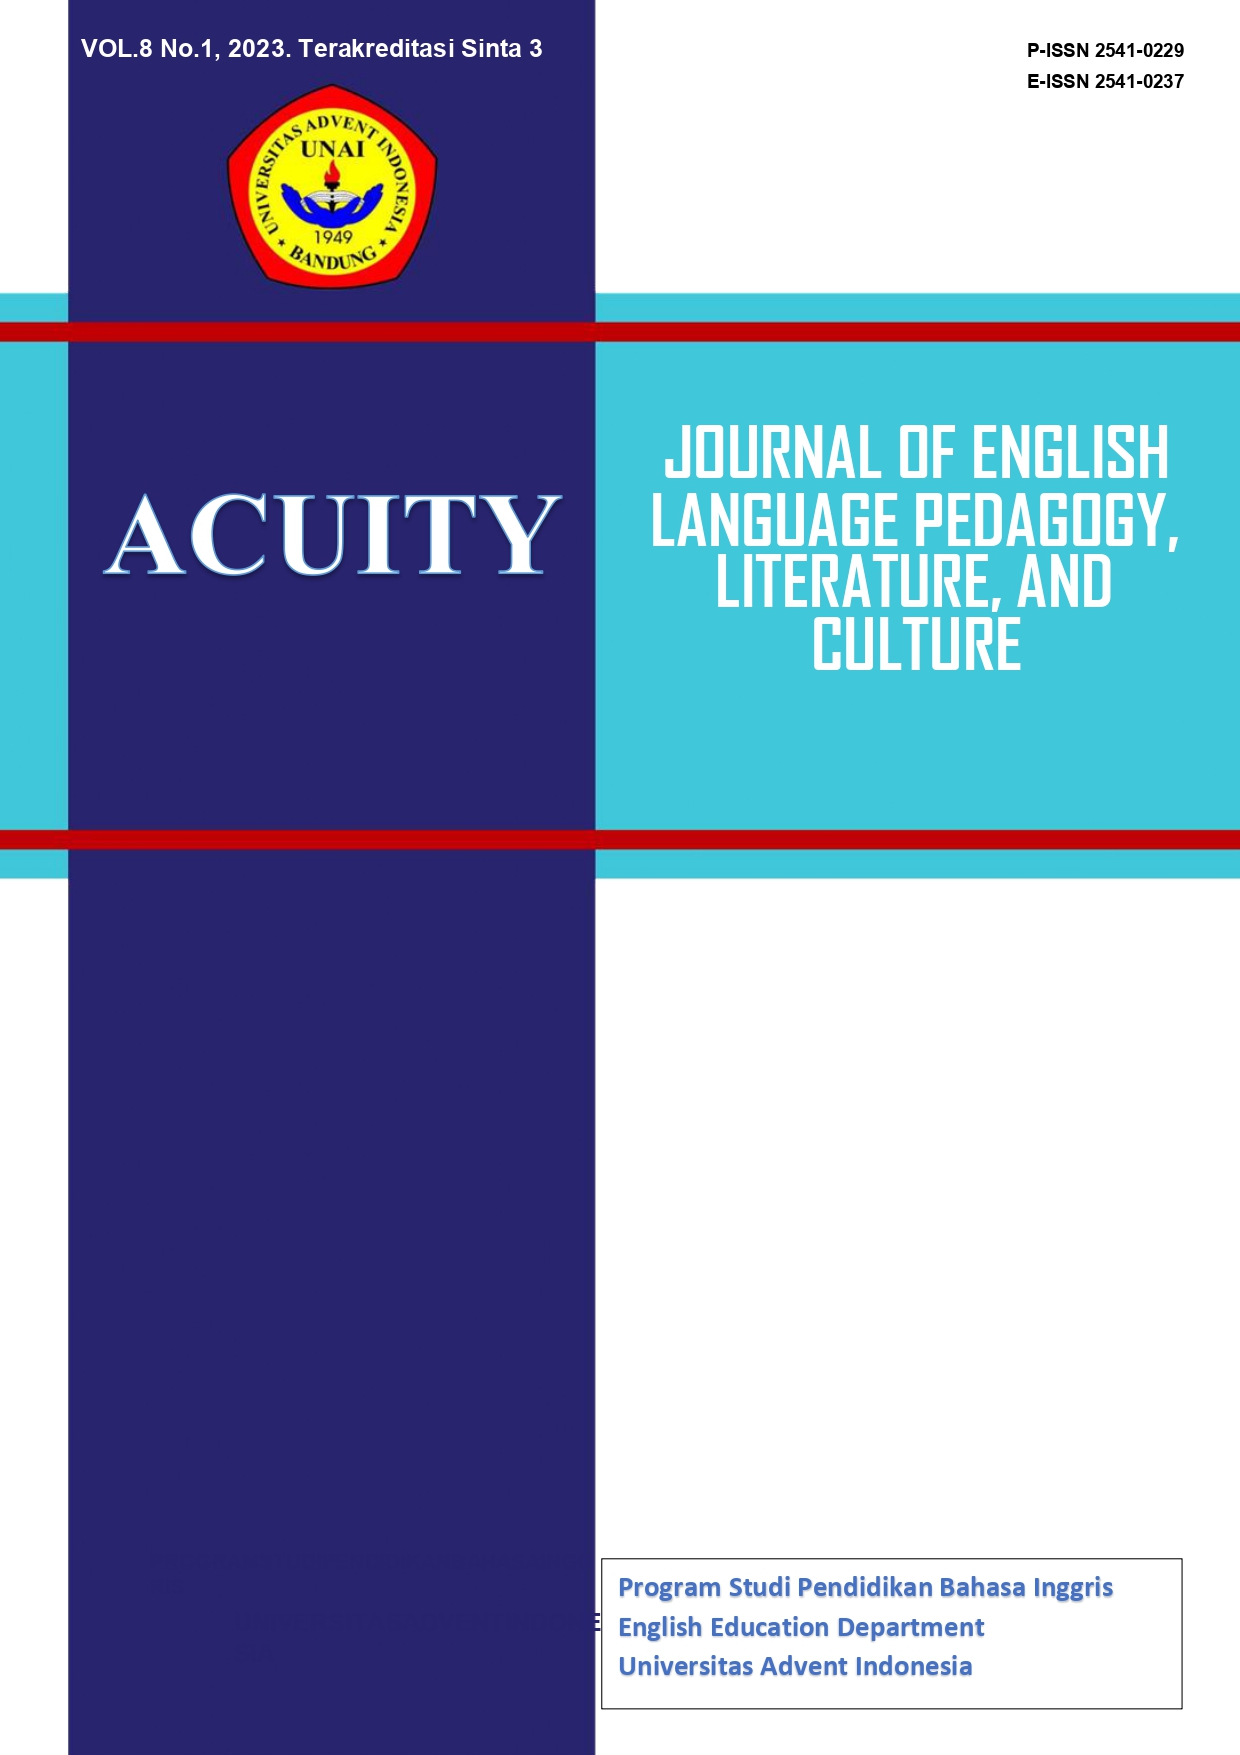 					View Vol. 8 No. 1 (2023): Acuity: Journal of English Language Pedagogy, Literature and Culture
				